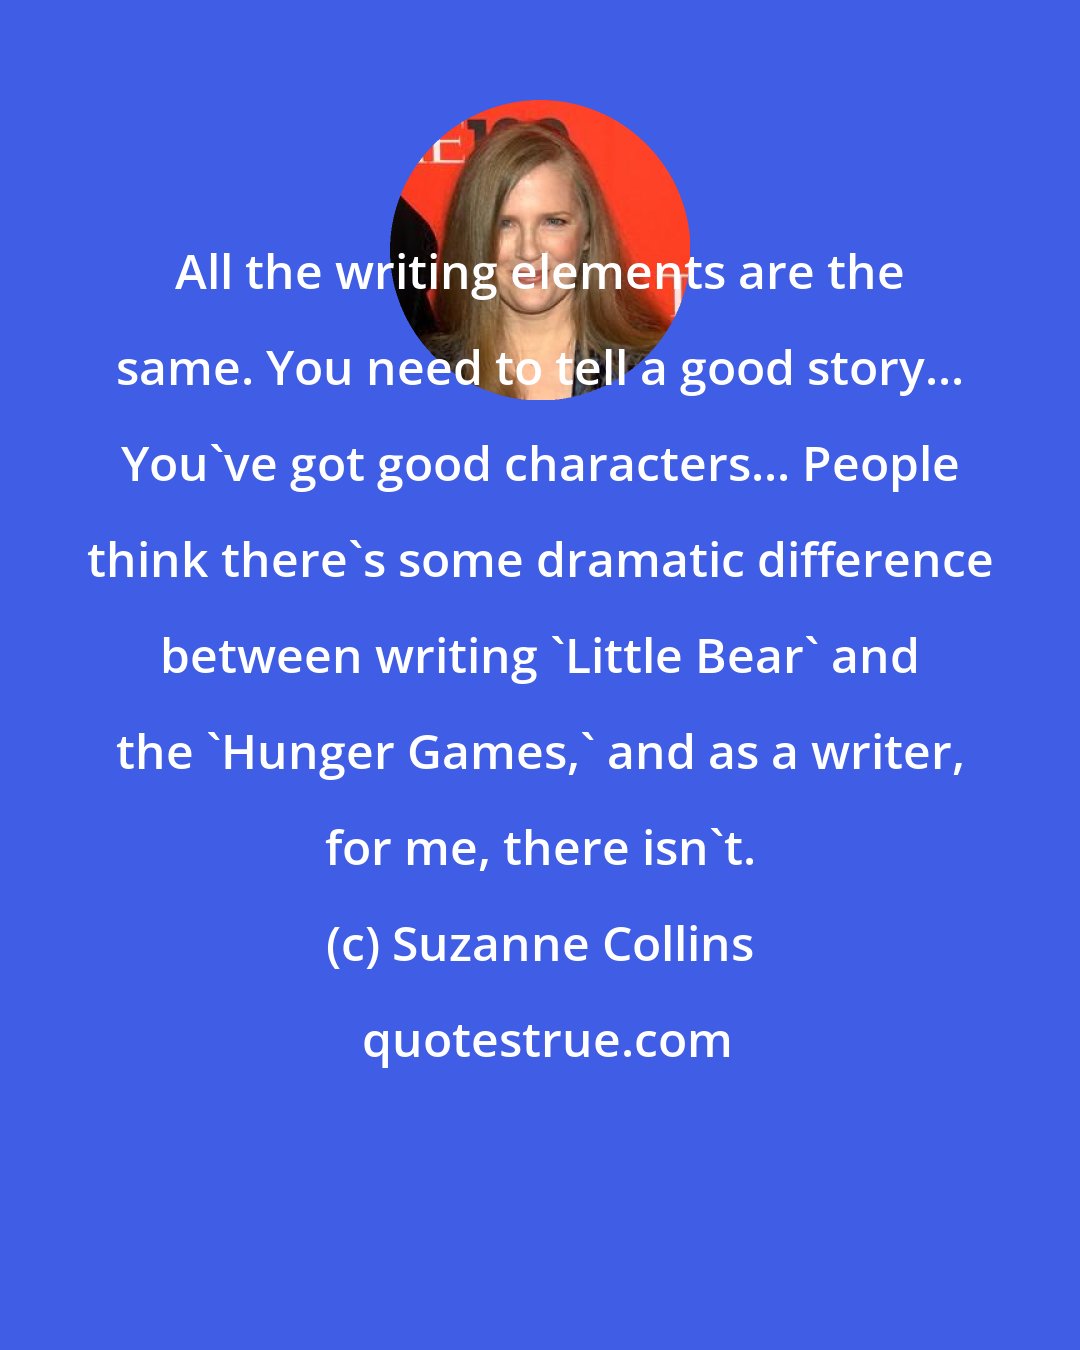 Suzanne Collins: All the writing elements are the same. You need to tell a good story... You've got good characters... People think there's some dramatic difference between writing 'Little Bear' and the 'Hunger Games,' and as a writer, for me, there isn't.